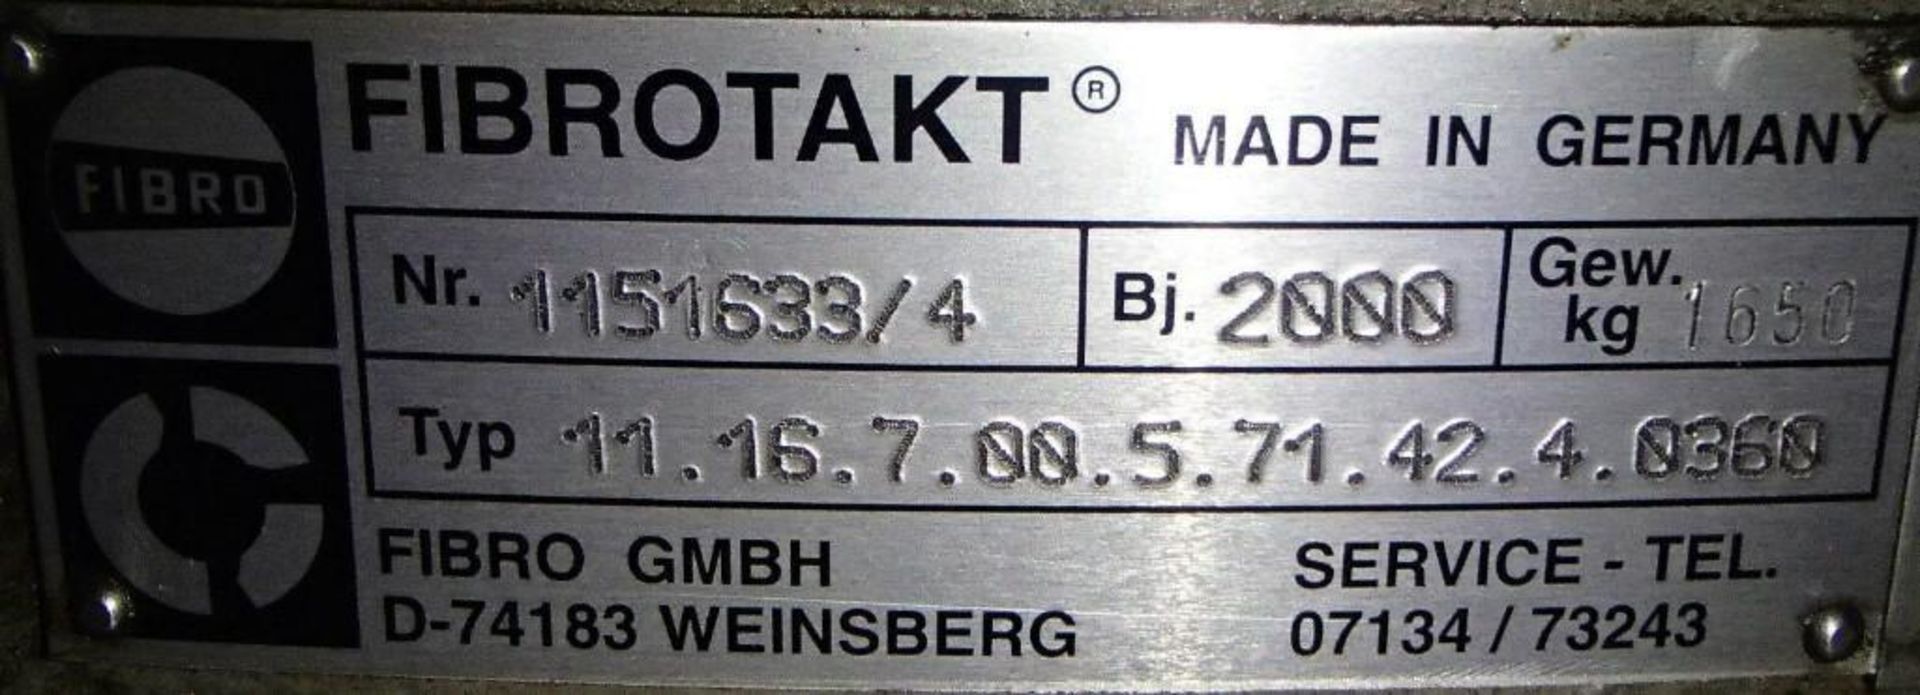 55" Fibrotakt Rotary Dial Type Indexing Table - Image 7 of 7